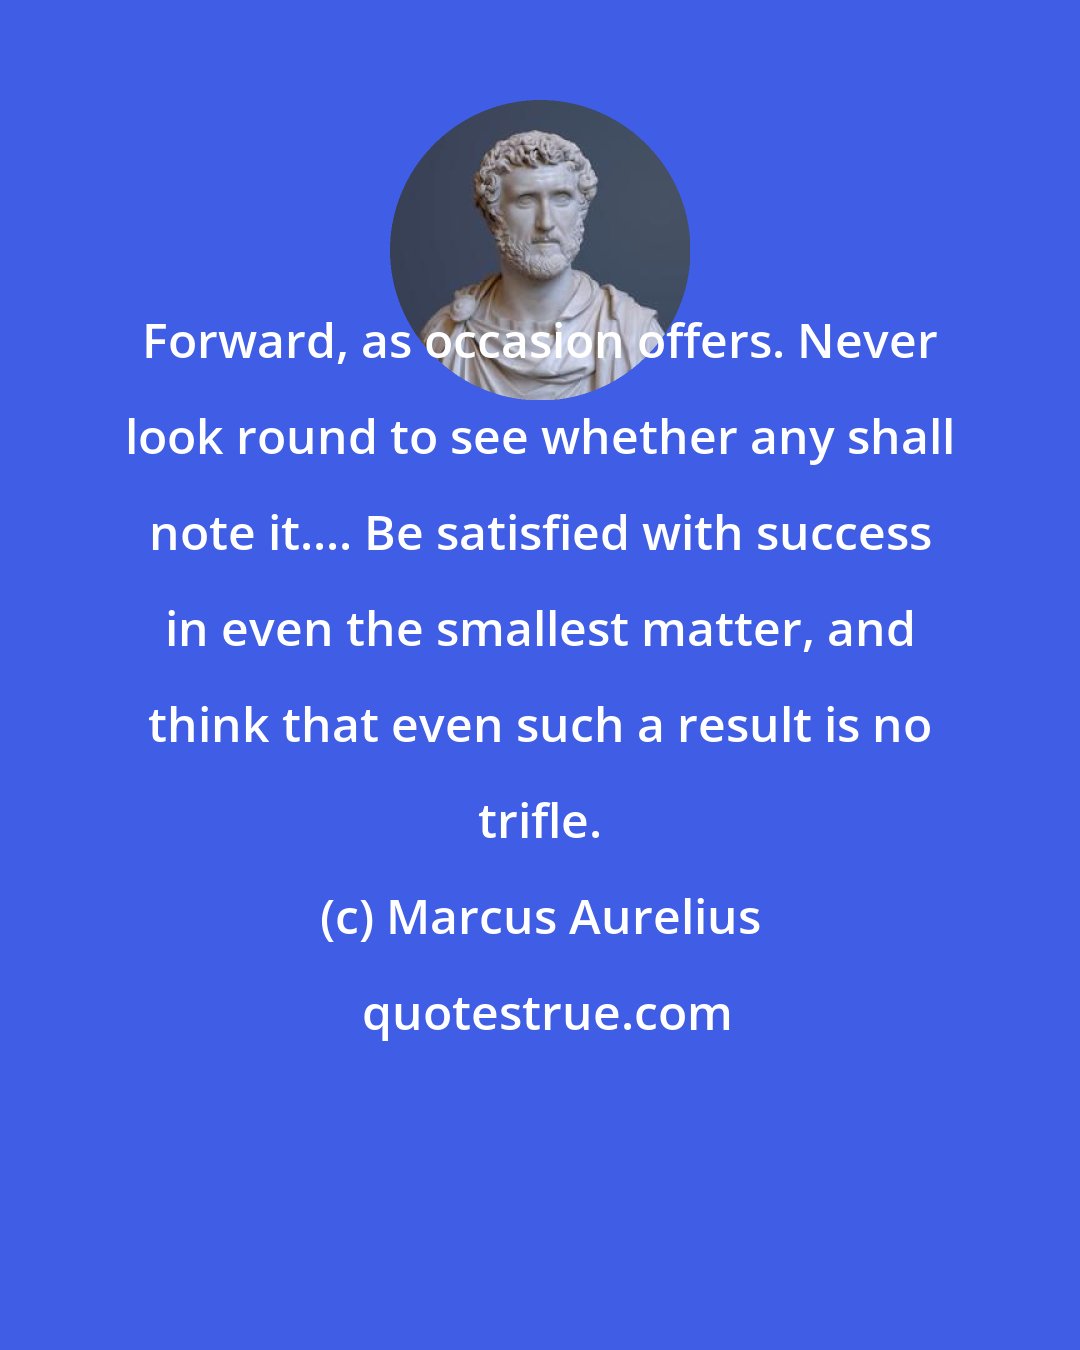 Marcus Aurelius: Forward, as occasion offers. Never look round to see whether any shall note it.... Be satisfied with success in even the smallest matter, and think that even such a result is no trifle.